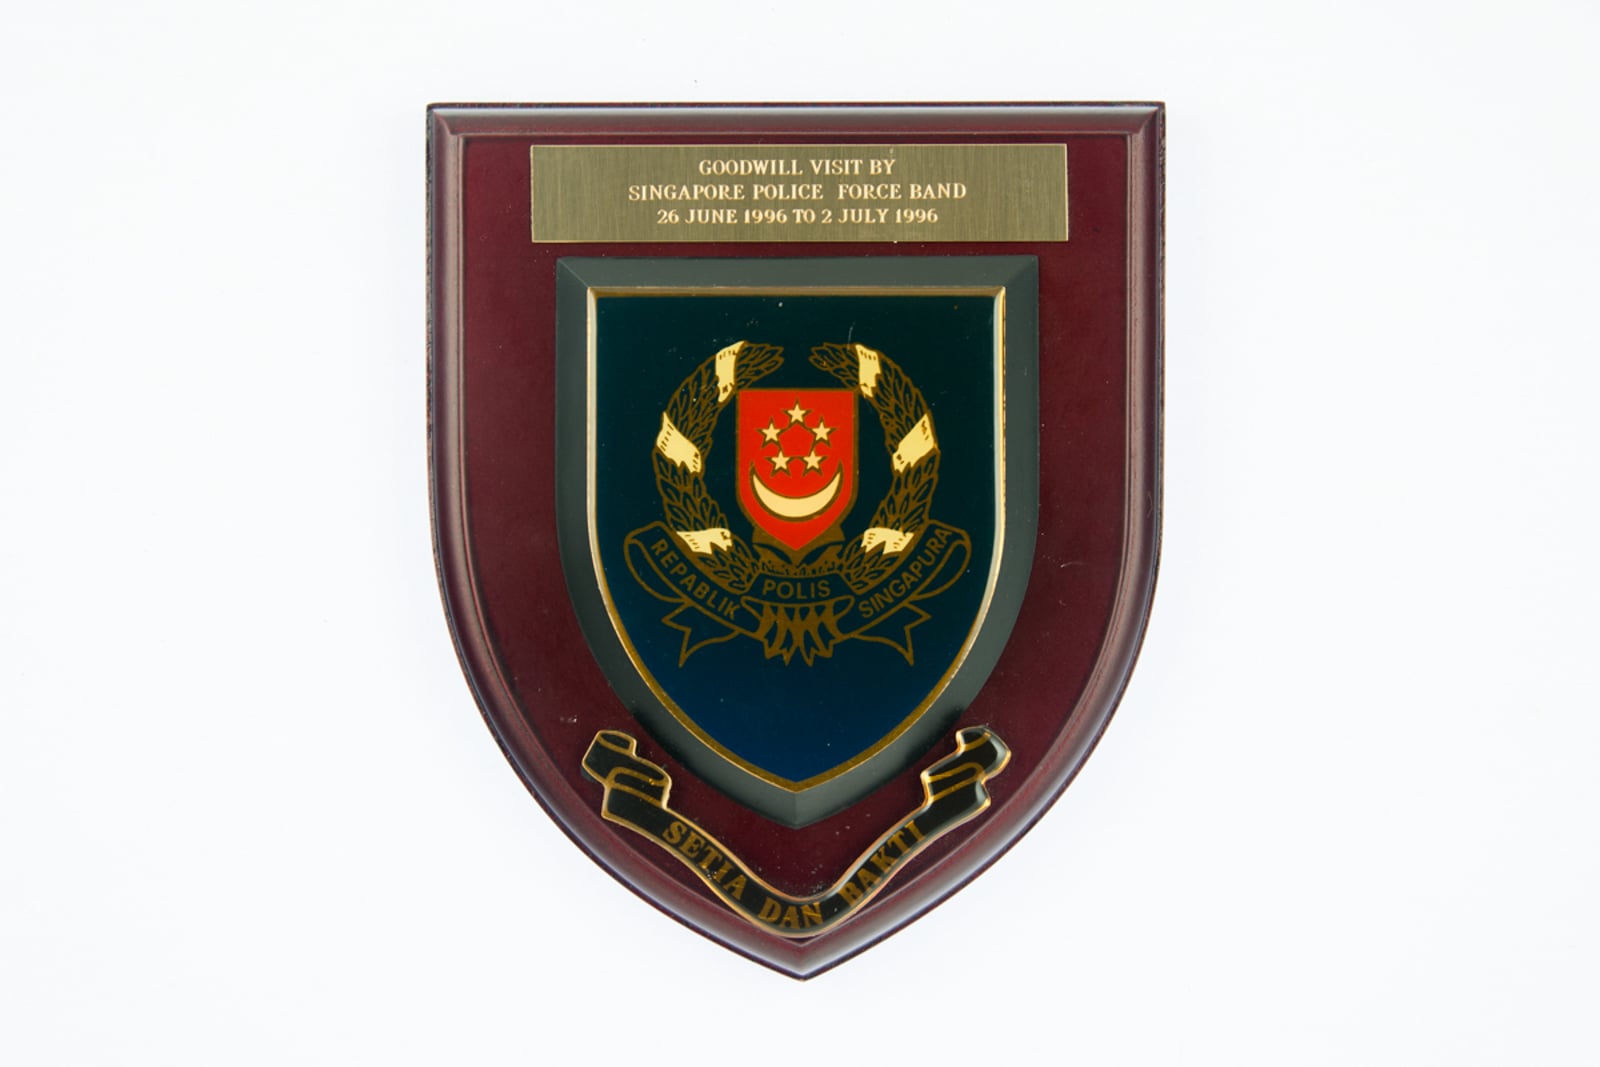 Singapore Police Force Band Plaque 1996